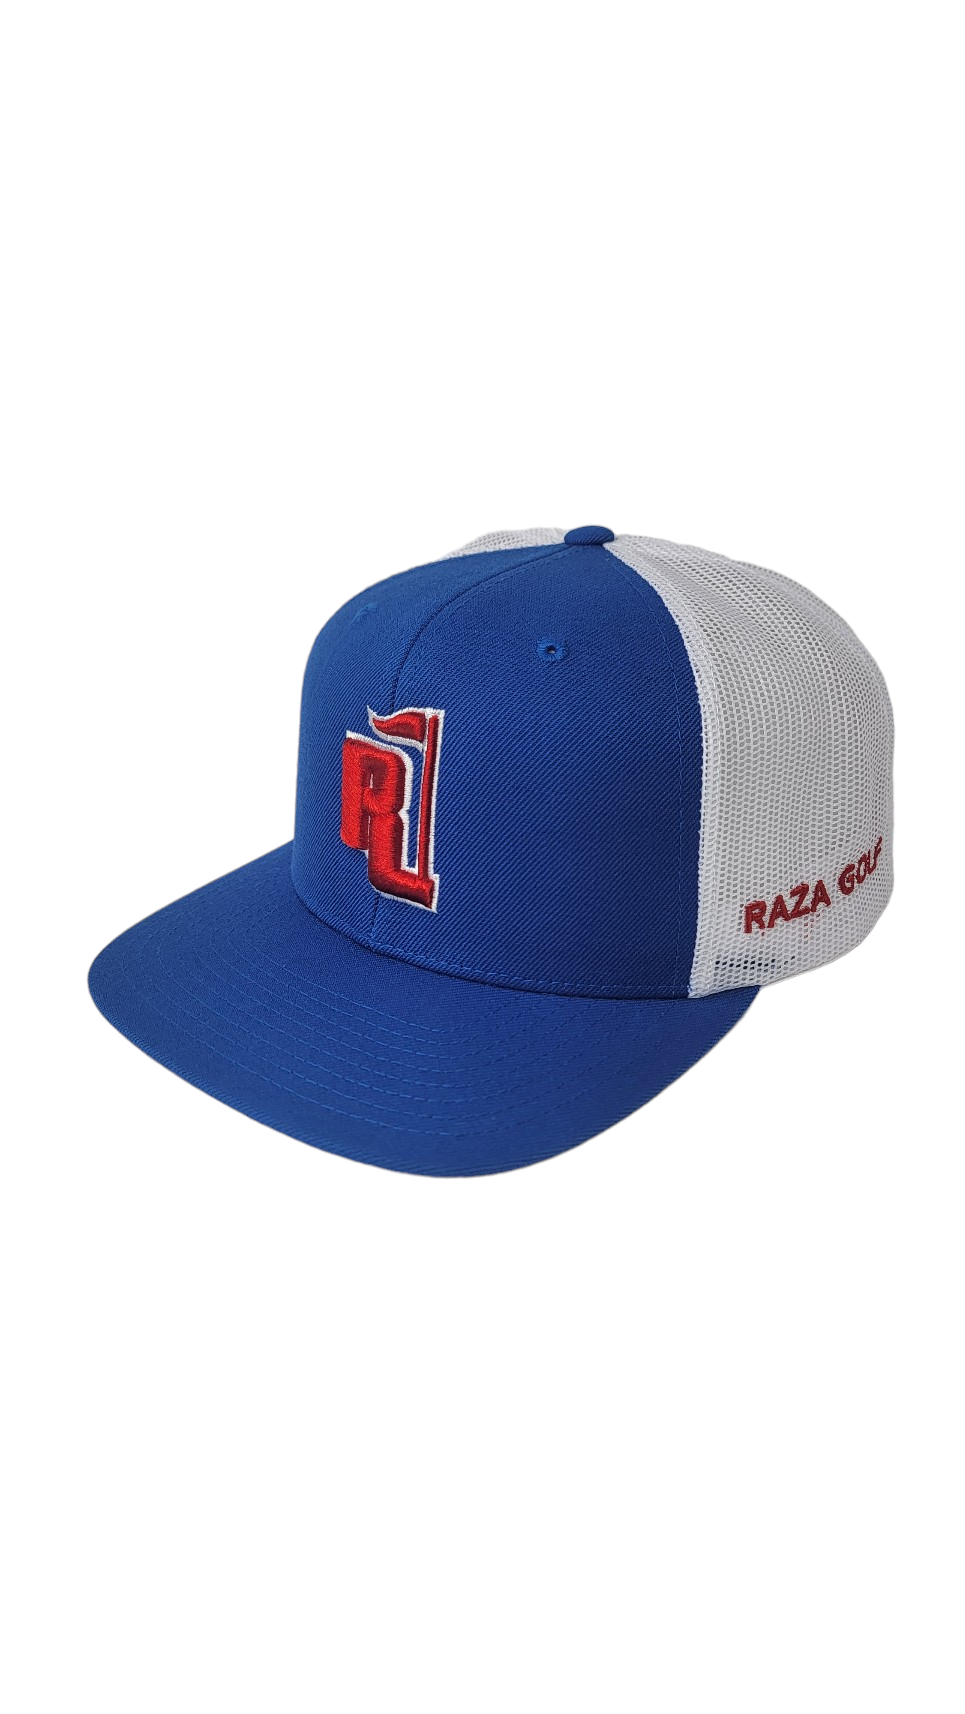 Raza Golf Royal Blue and White Trucker with Red and White Logo